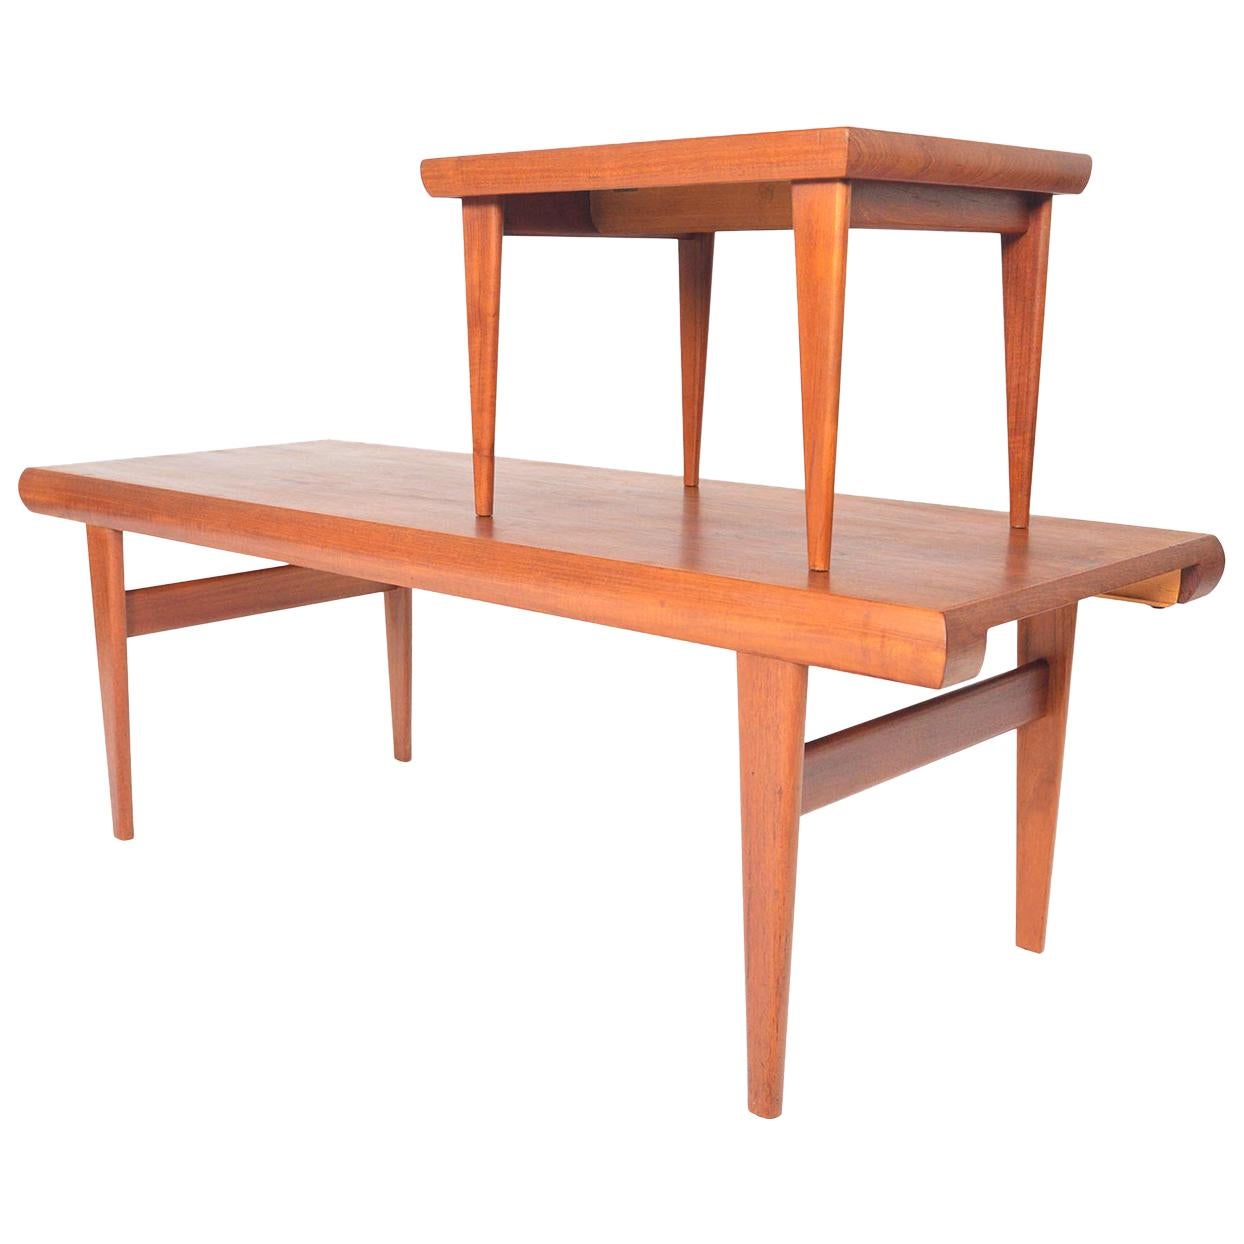 Midcentury Teak Coffee Table with Fold Out Side Table